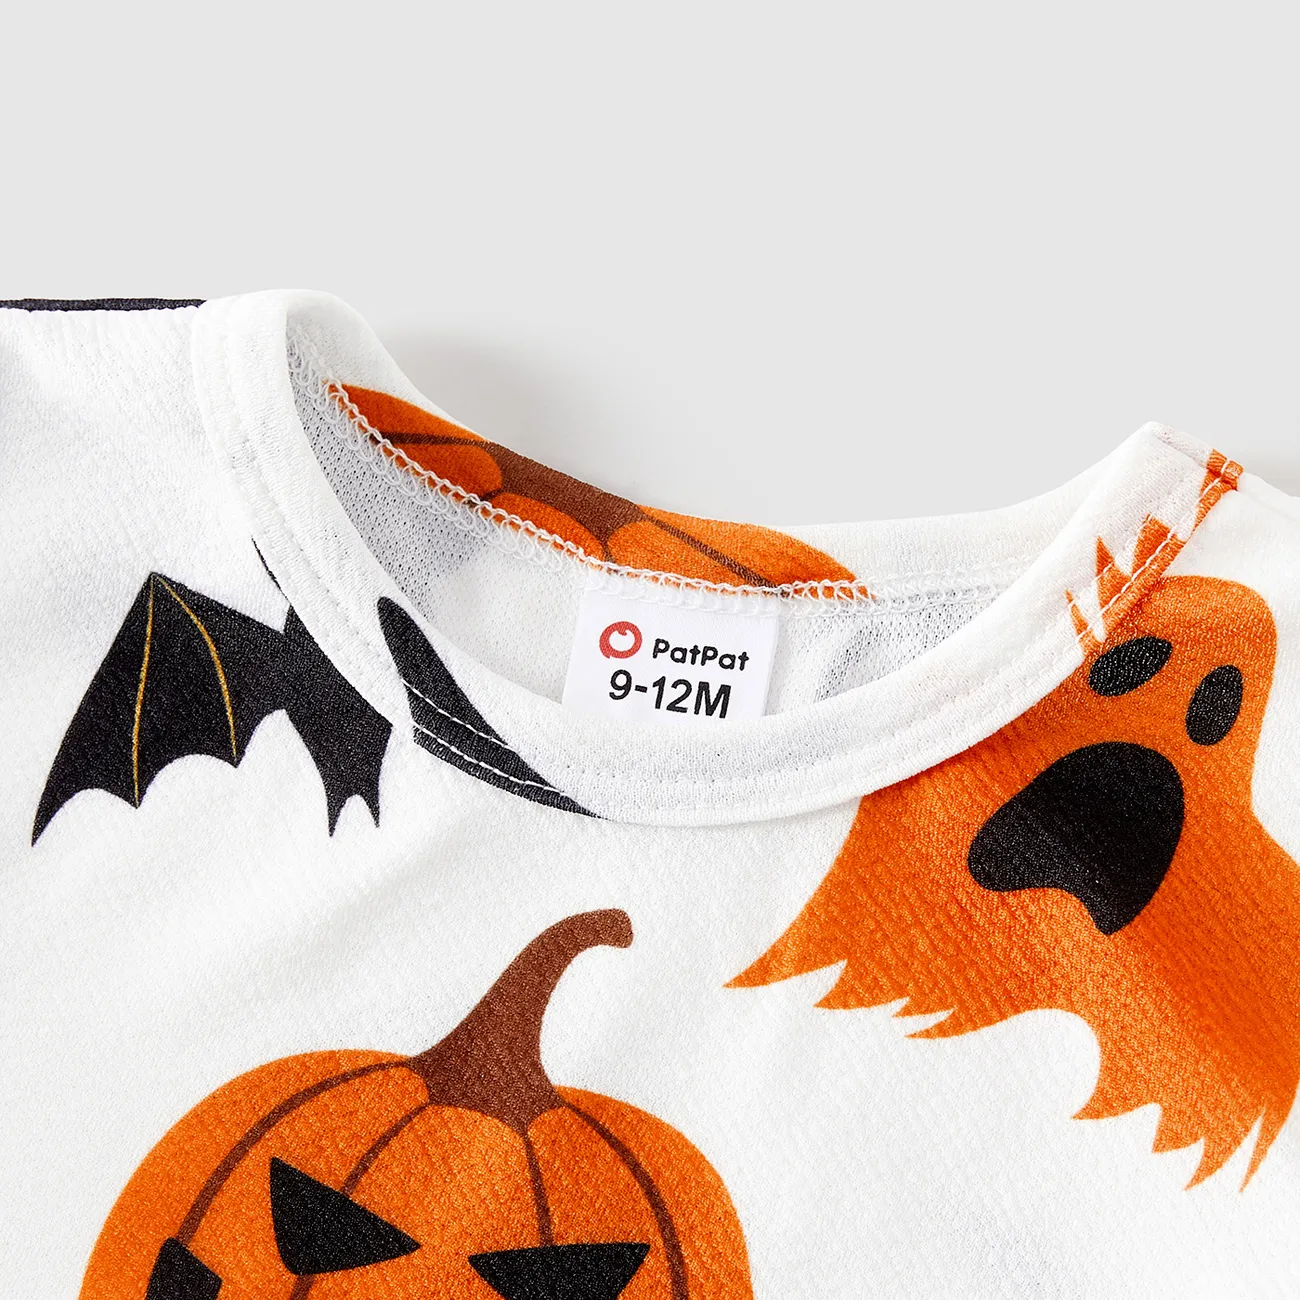 Halloween Family Matching 95% Cotton Short-sleeve Graphic T-shirts Allover Print Drawstring Ruched Bodycon Dresses Sets Orange big image 1